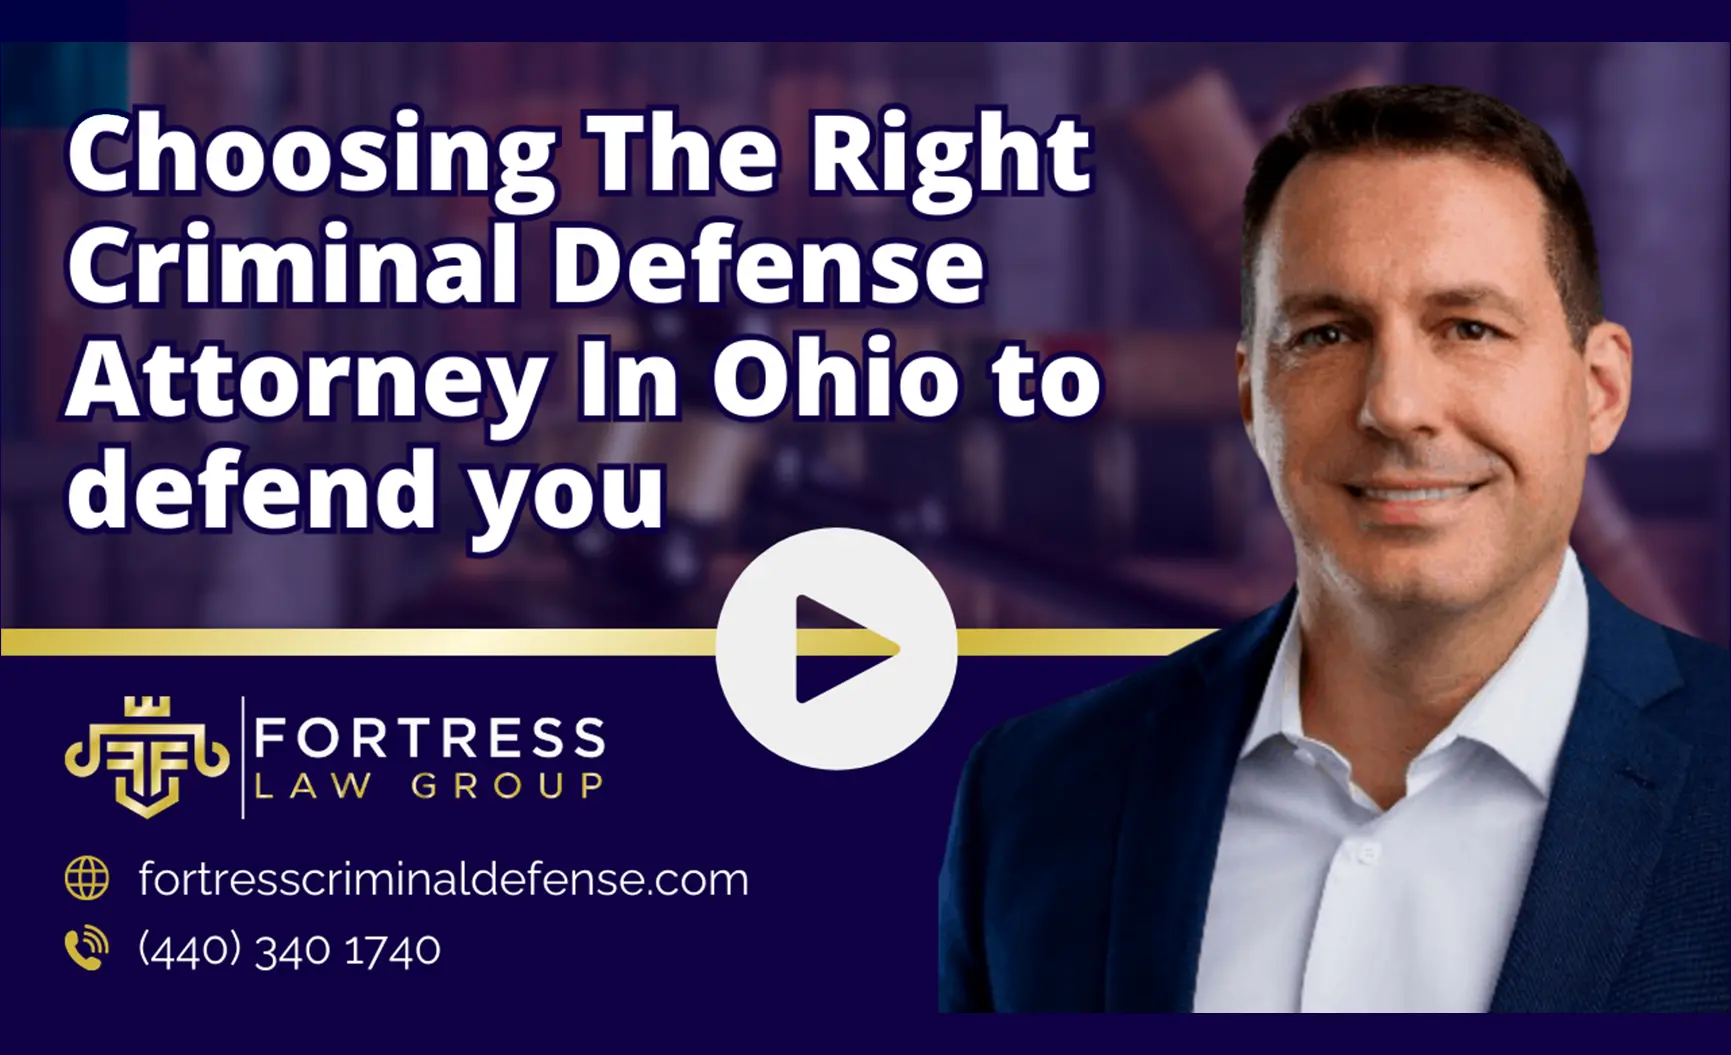 Choosing The Right Criminal Defense Attorney In Ohio to Defend You